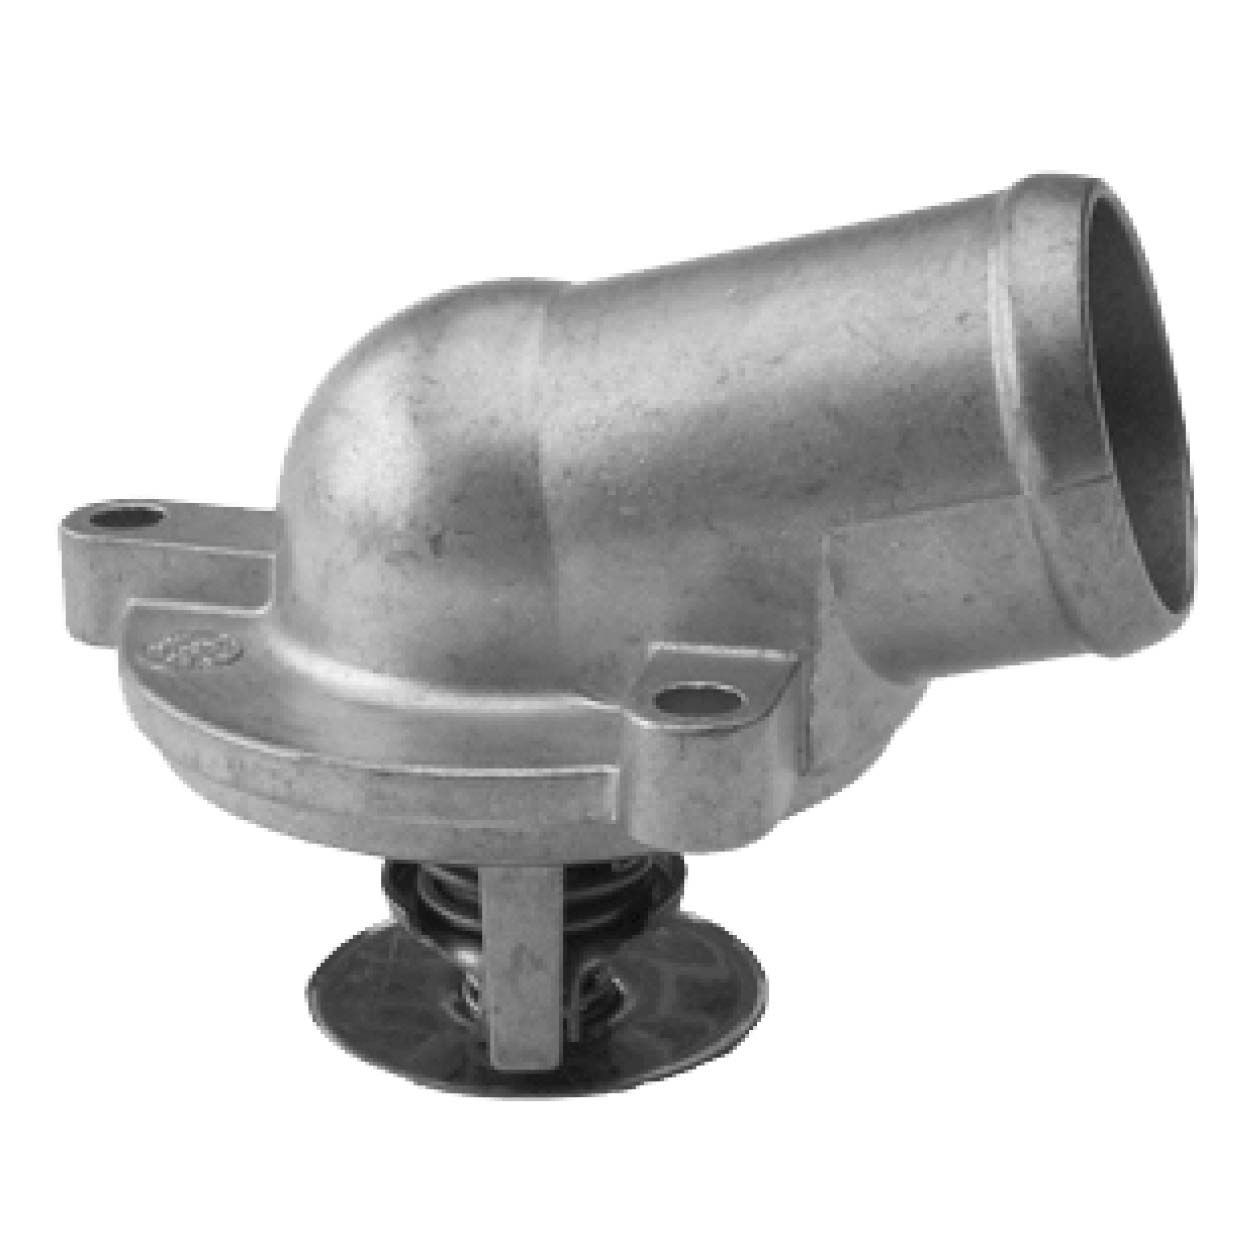 GATES TH34187G1 Engine thermostat Opening Temperature: 87°C, with gaskets/seals, with housing